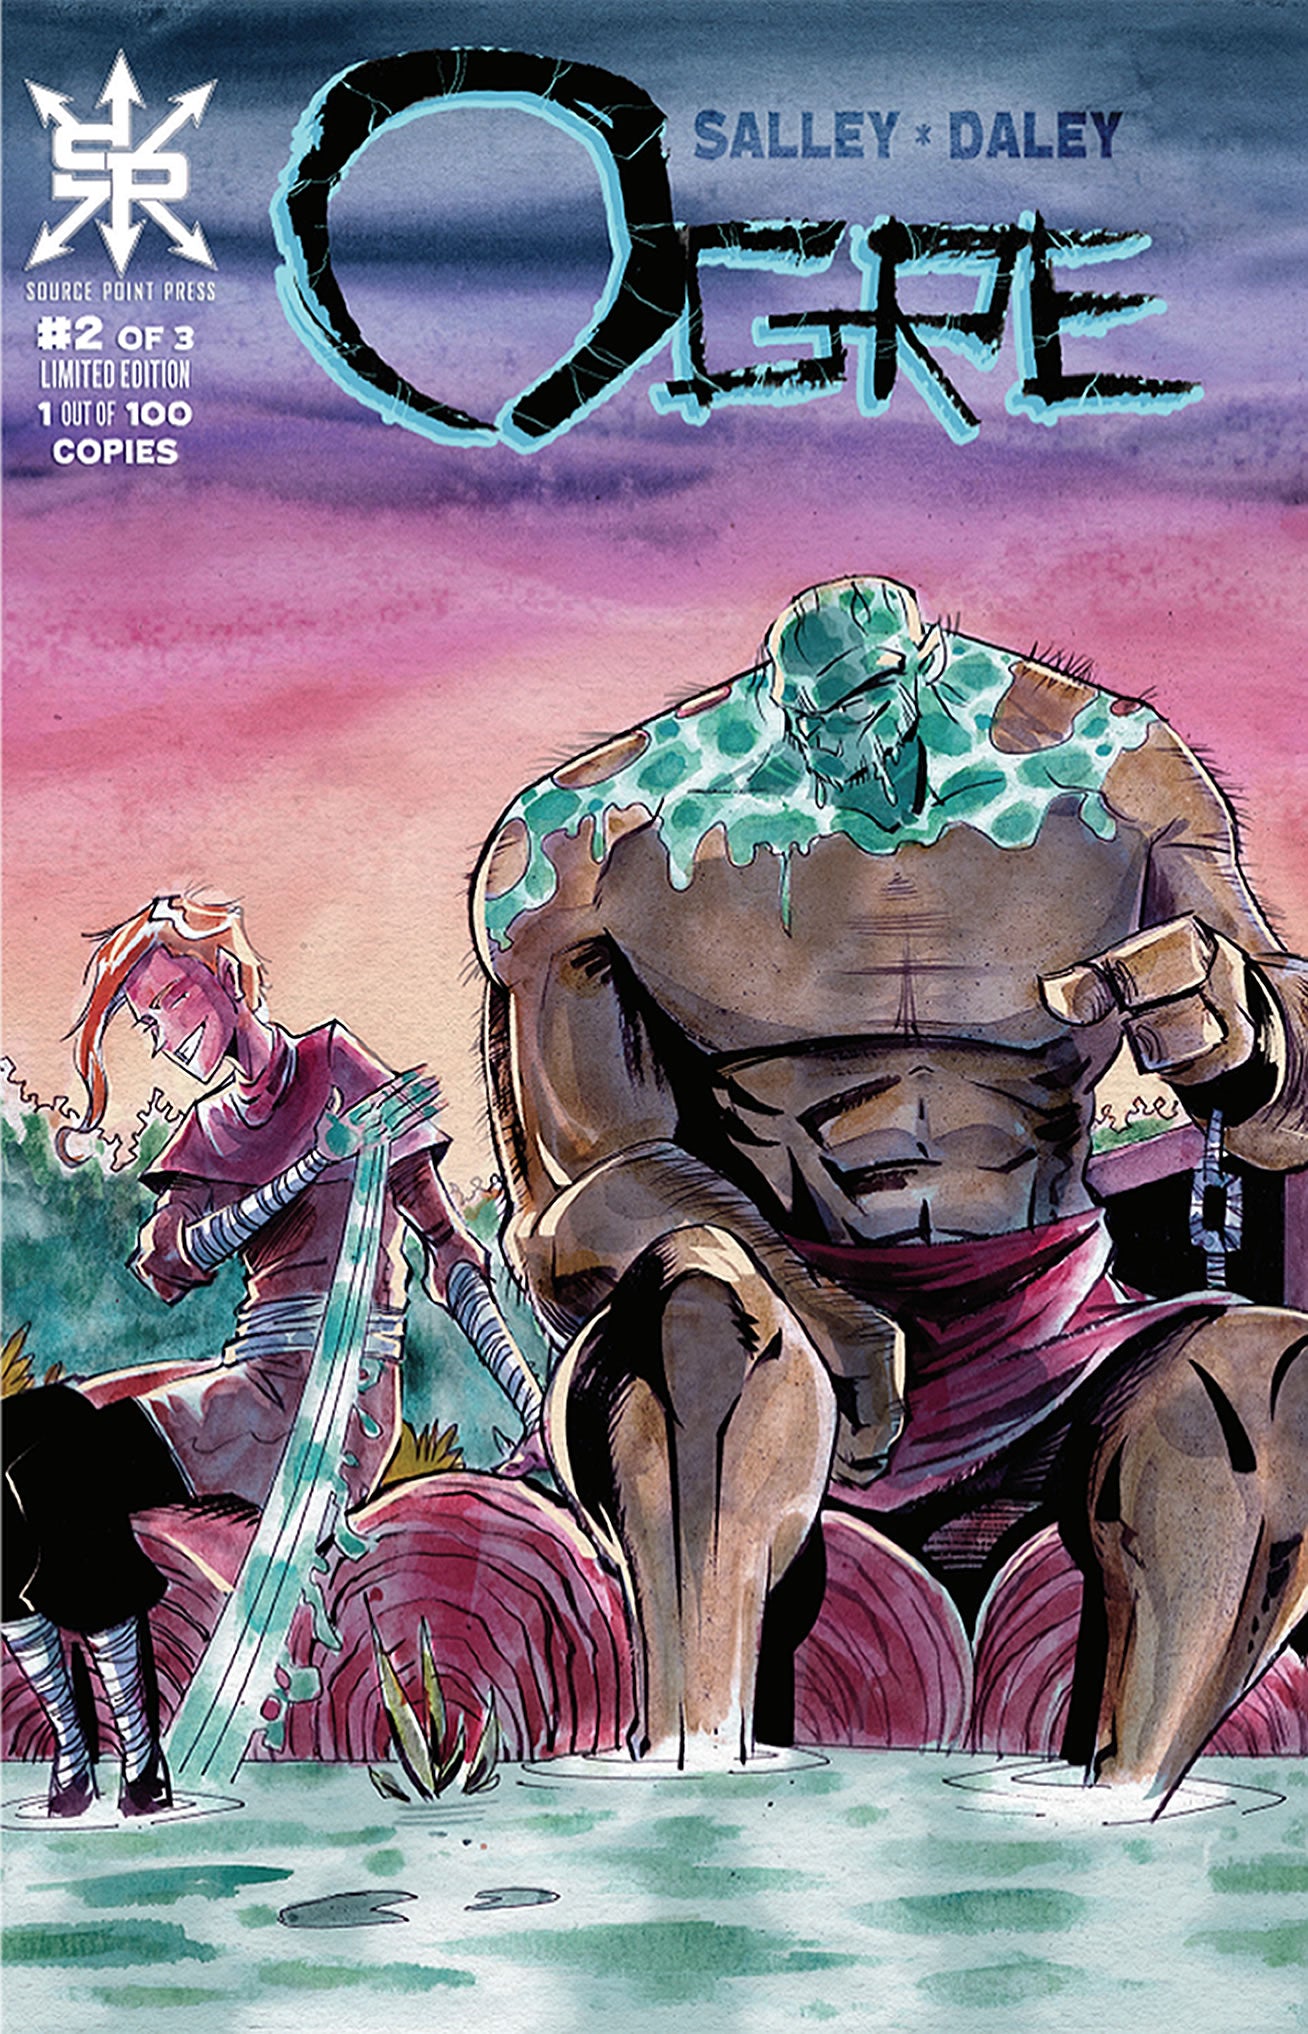 Ogre #1, #2, #3 Raft Trade Dress Connecting Cover Three Book Set